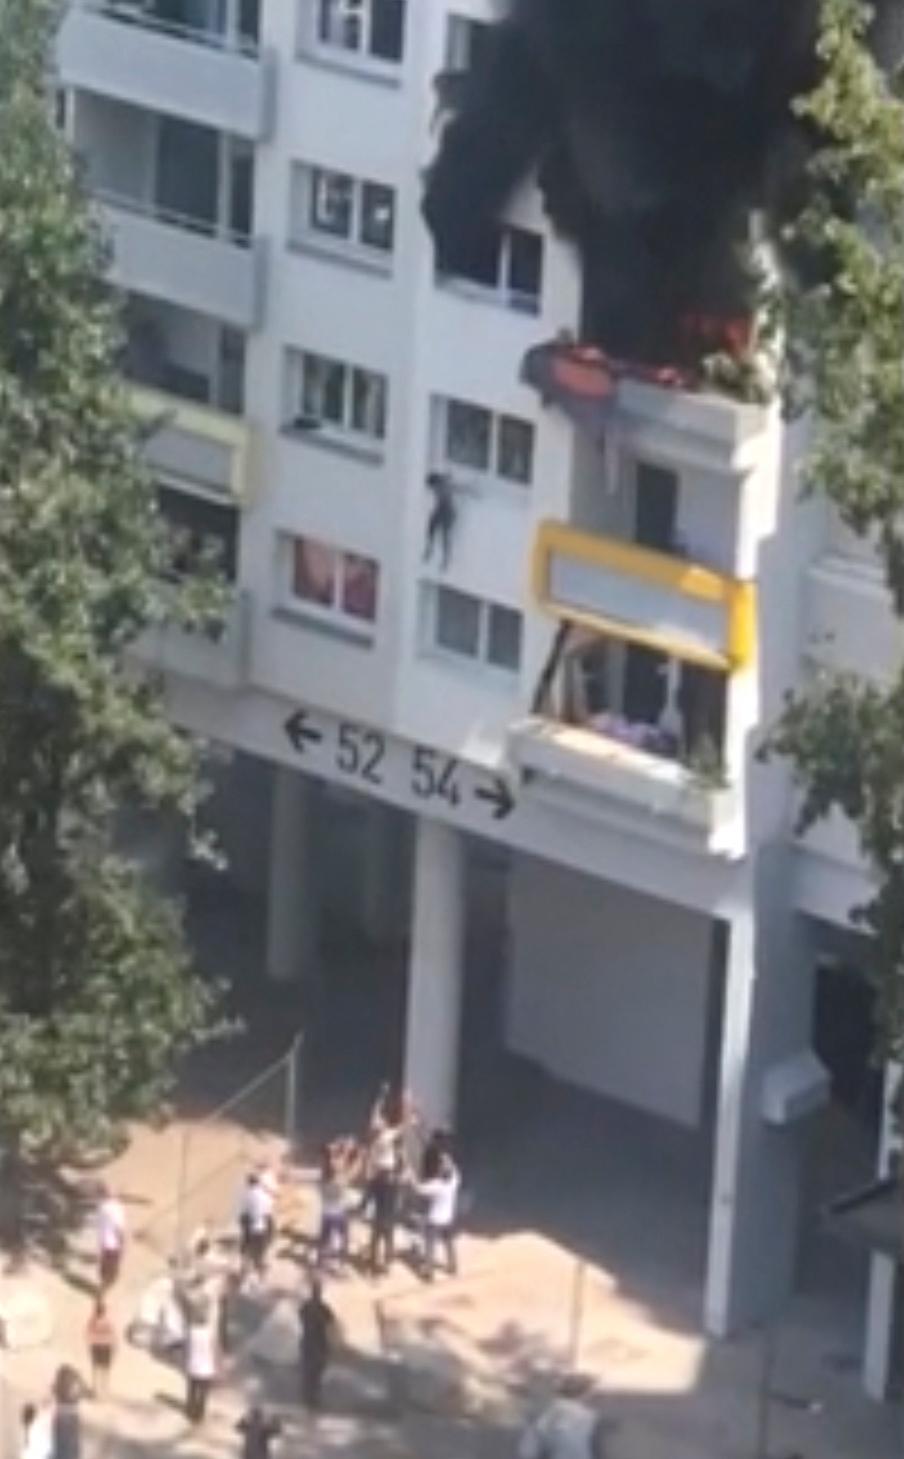 In this grab taken from video, a boy jumps from a window as flames engulf an apartment as onlookers below prepare to catch him in Grenoble, France, Tuesday, July 21, 2020. (AP)